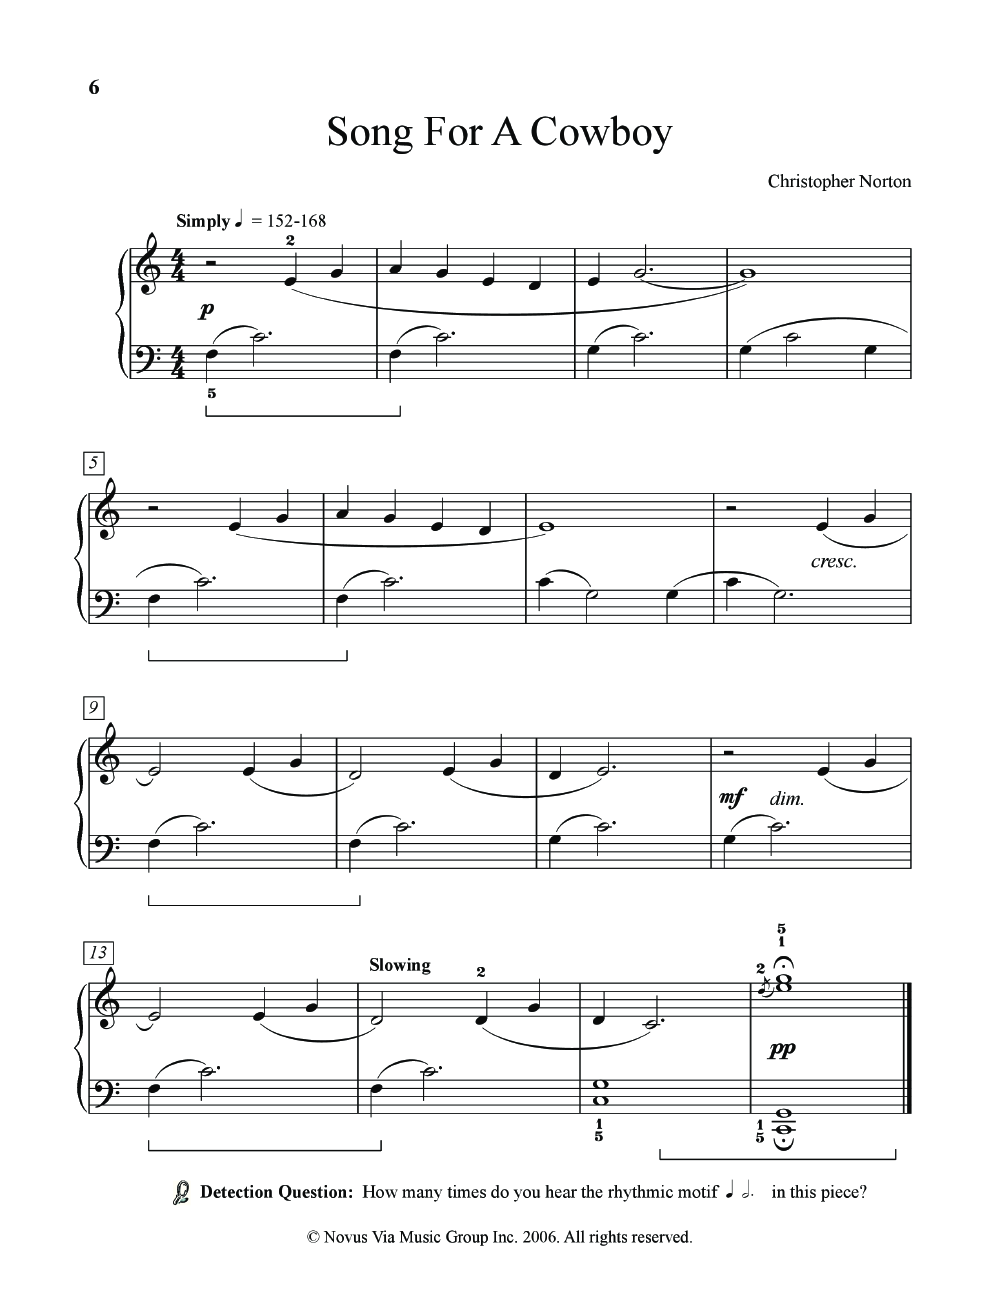 AMERICAN POPULAR PIANO #2 REPERTOIRE Book with Online Audio Access